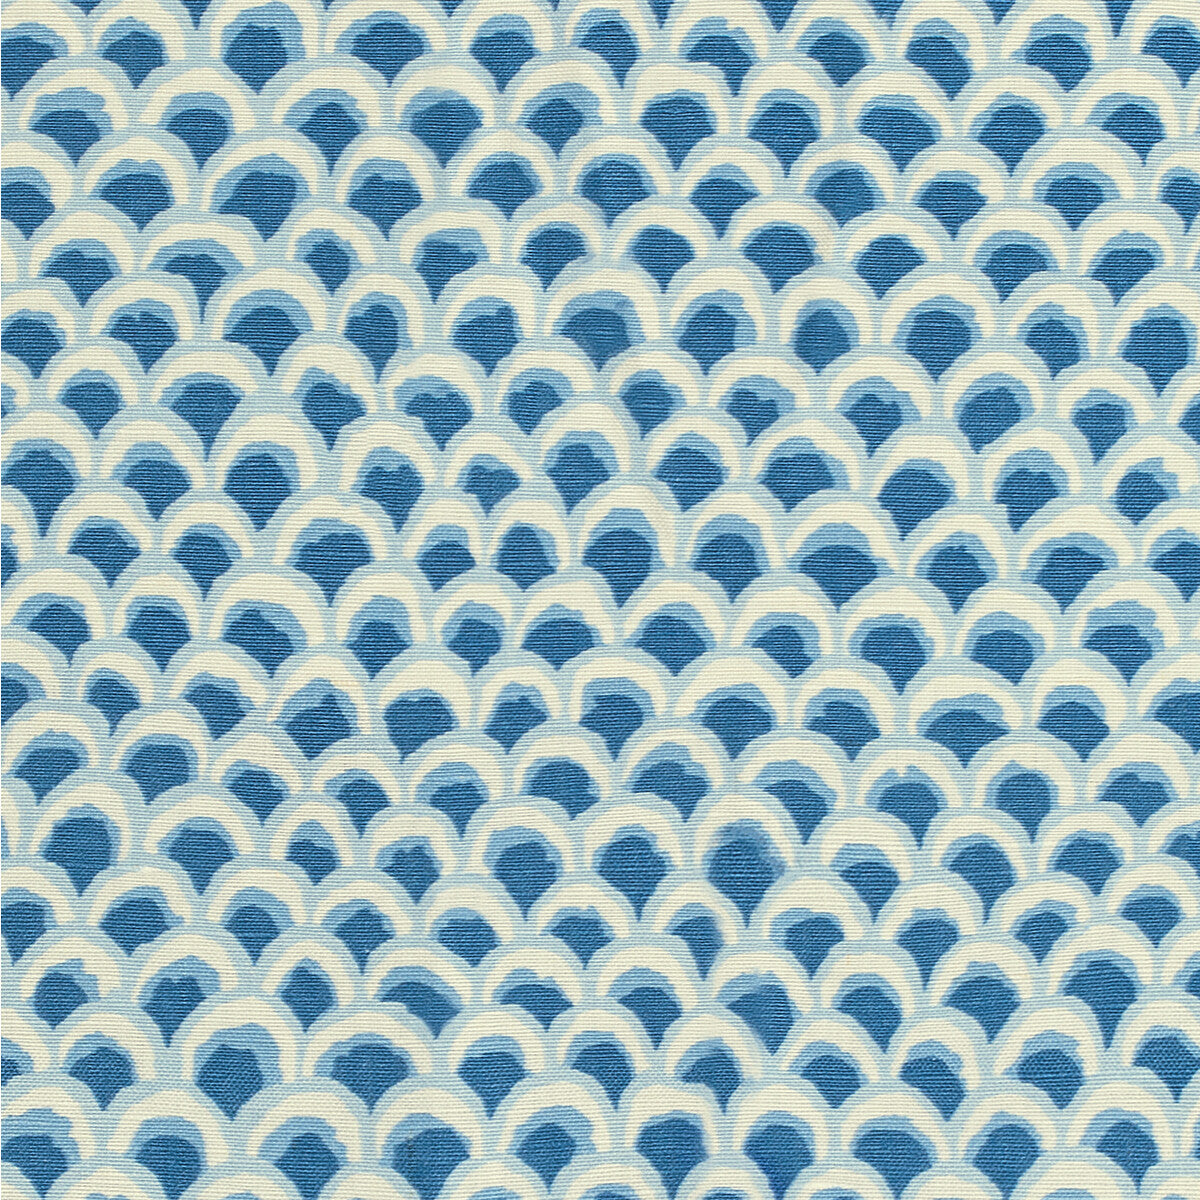 Pave II Print fabric in blue color - pattern 8020126.5.0 - by Brunschwig &amp; Fils in the Louverne collection